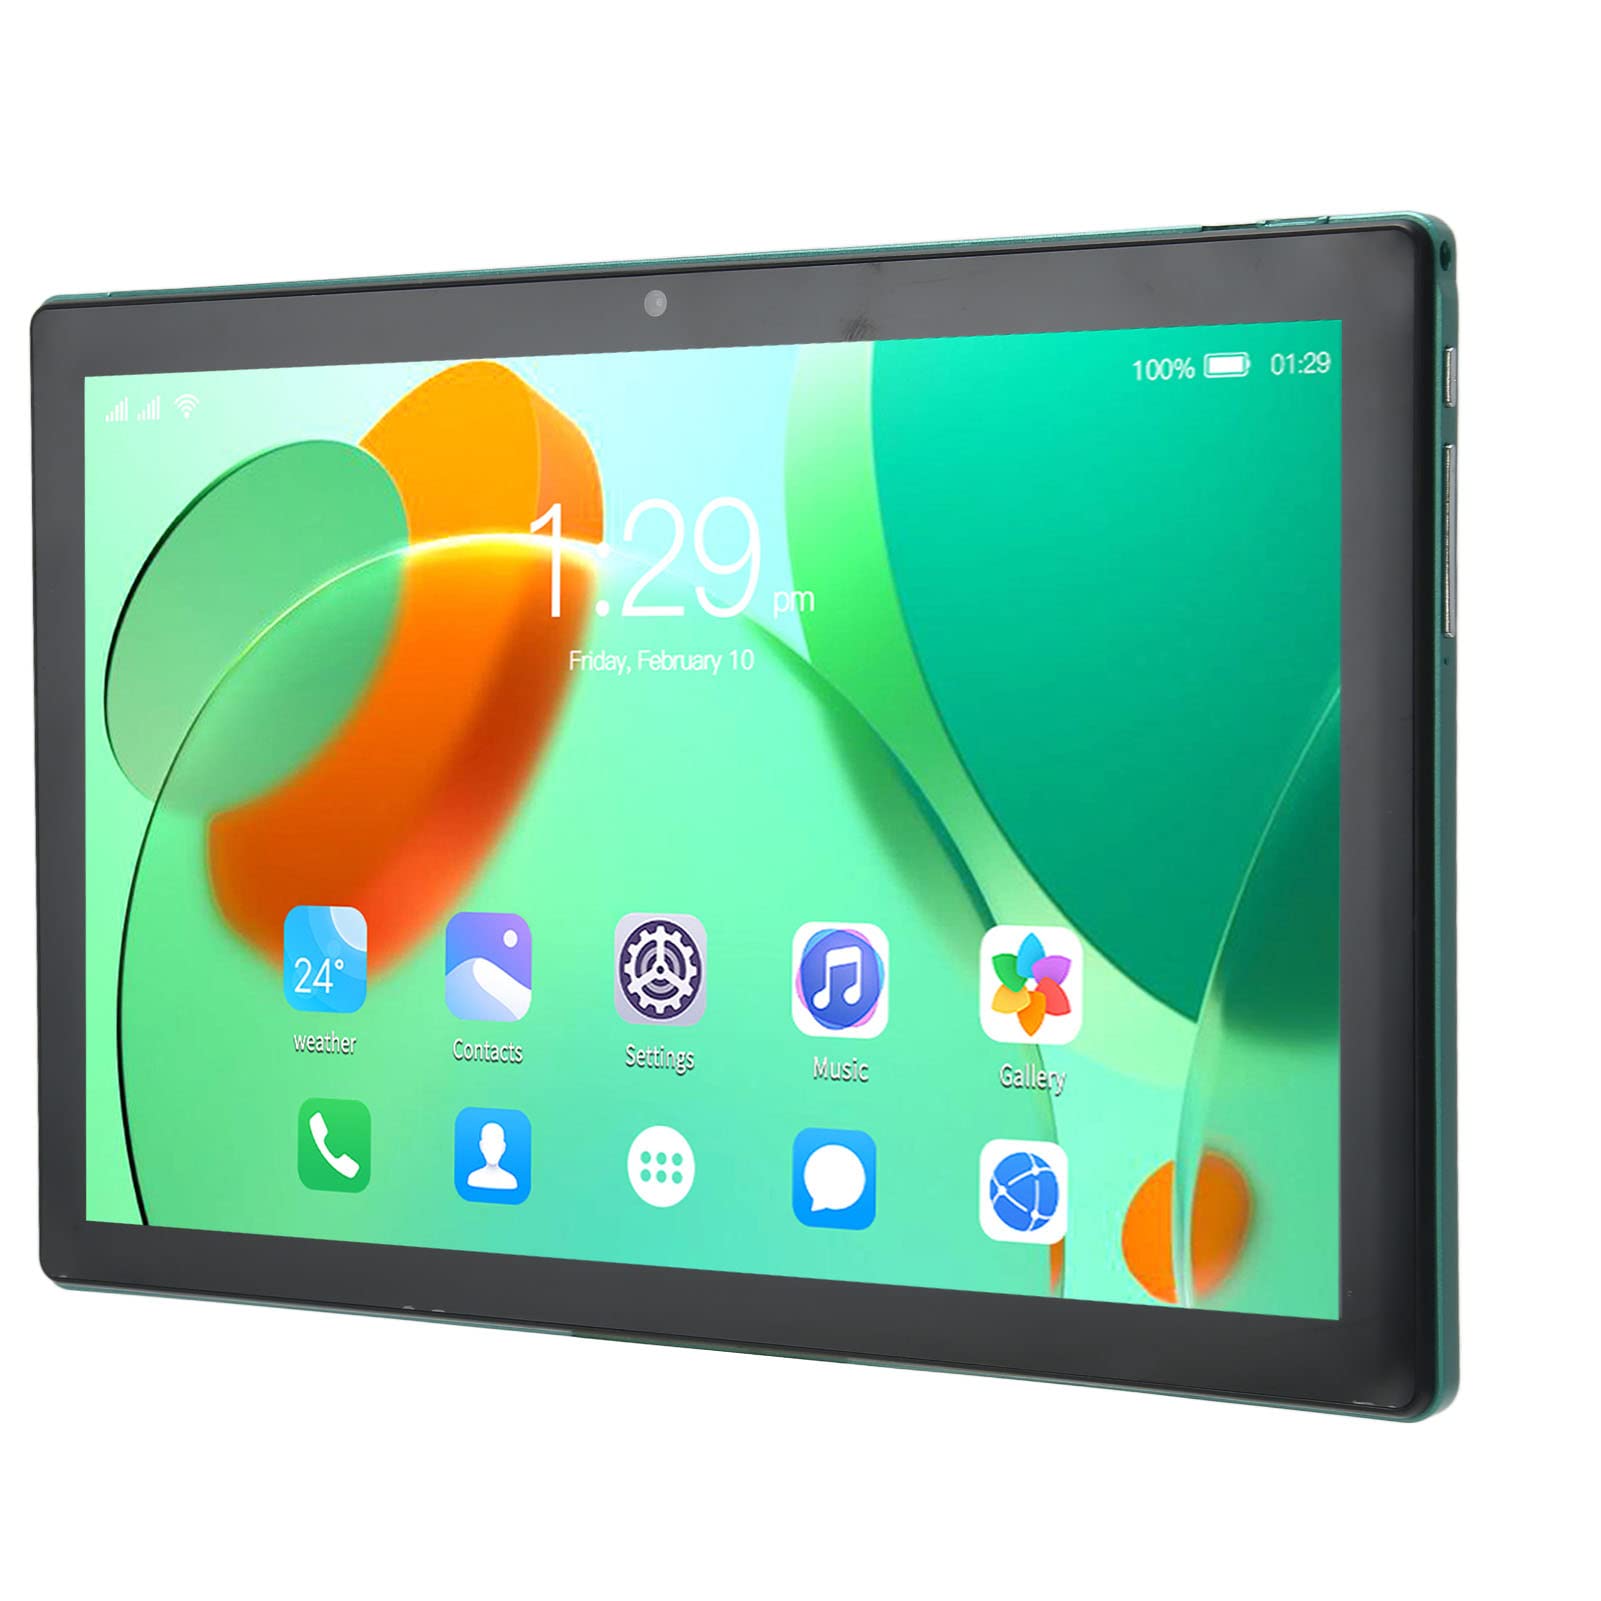 10.1 inch Tablet Android 12, Tablet PC with Sim Card Slot, 8GB RAM 256GB ROM, Octa Core CPU, 1960x1080 FHD Touchscreen, 2.4G / 5G WiFi, 4G LTE, 7000mAh Battery